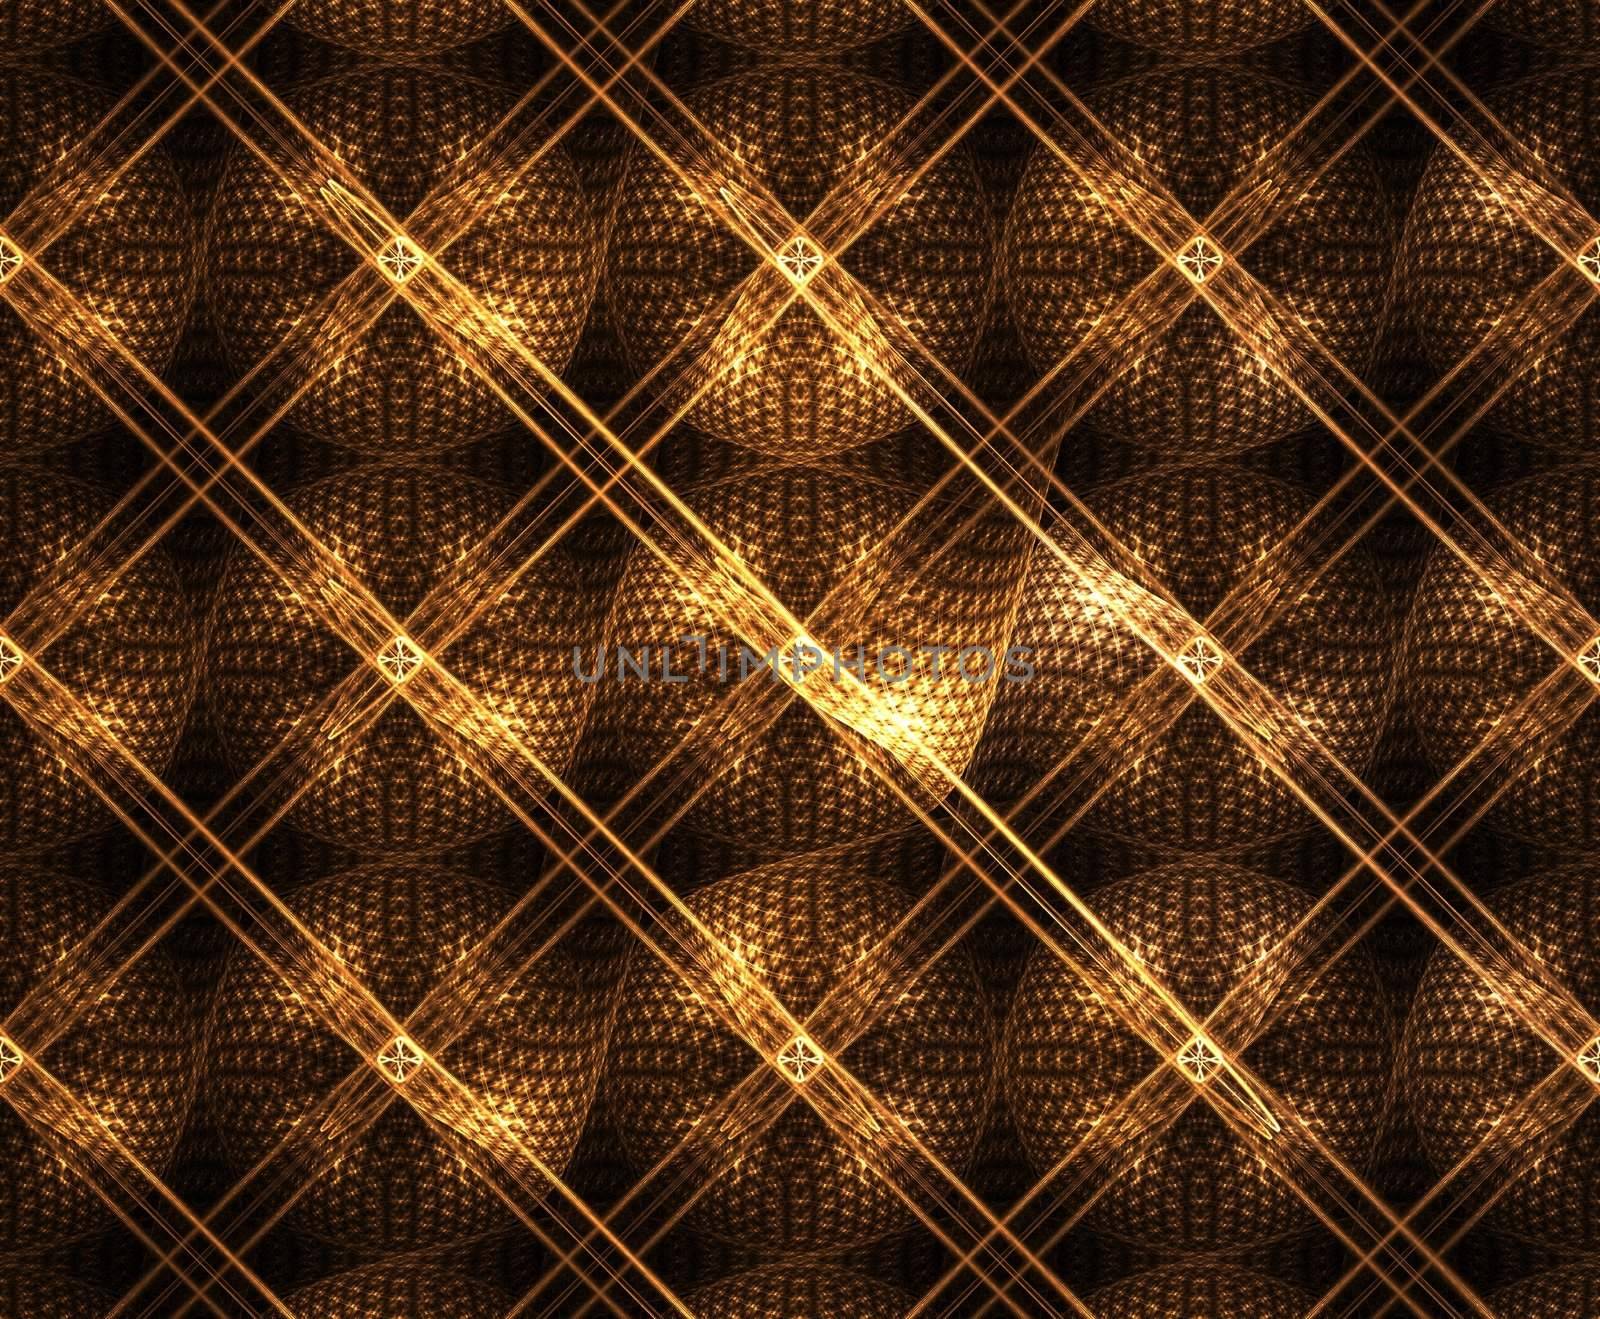 Digital generated tiling, looks as interweaving of golden threads